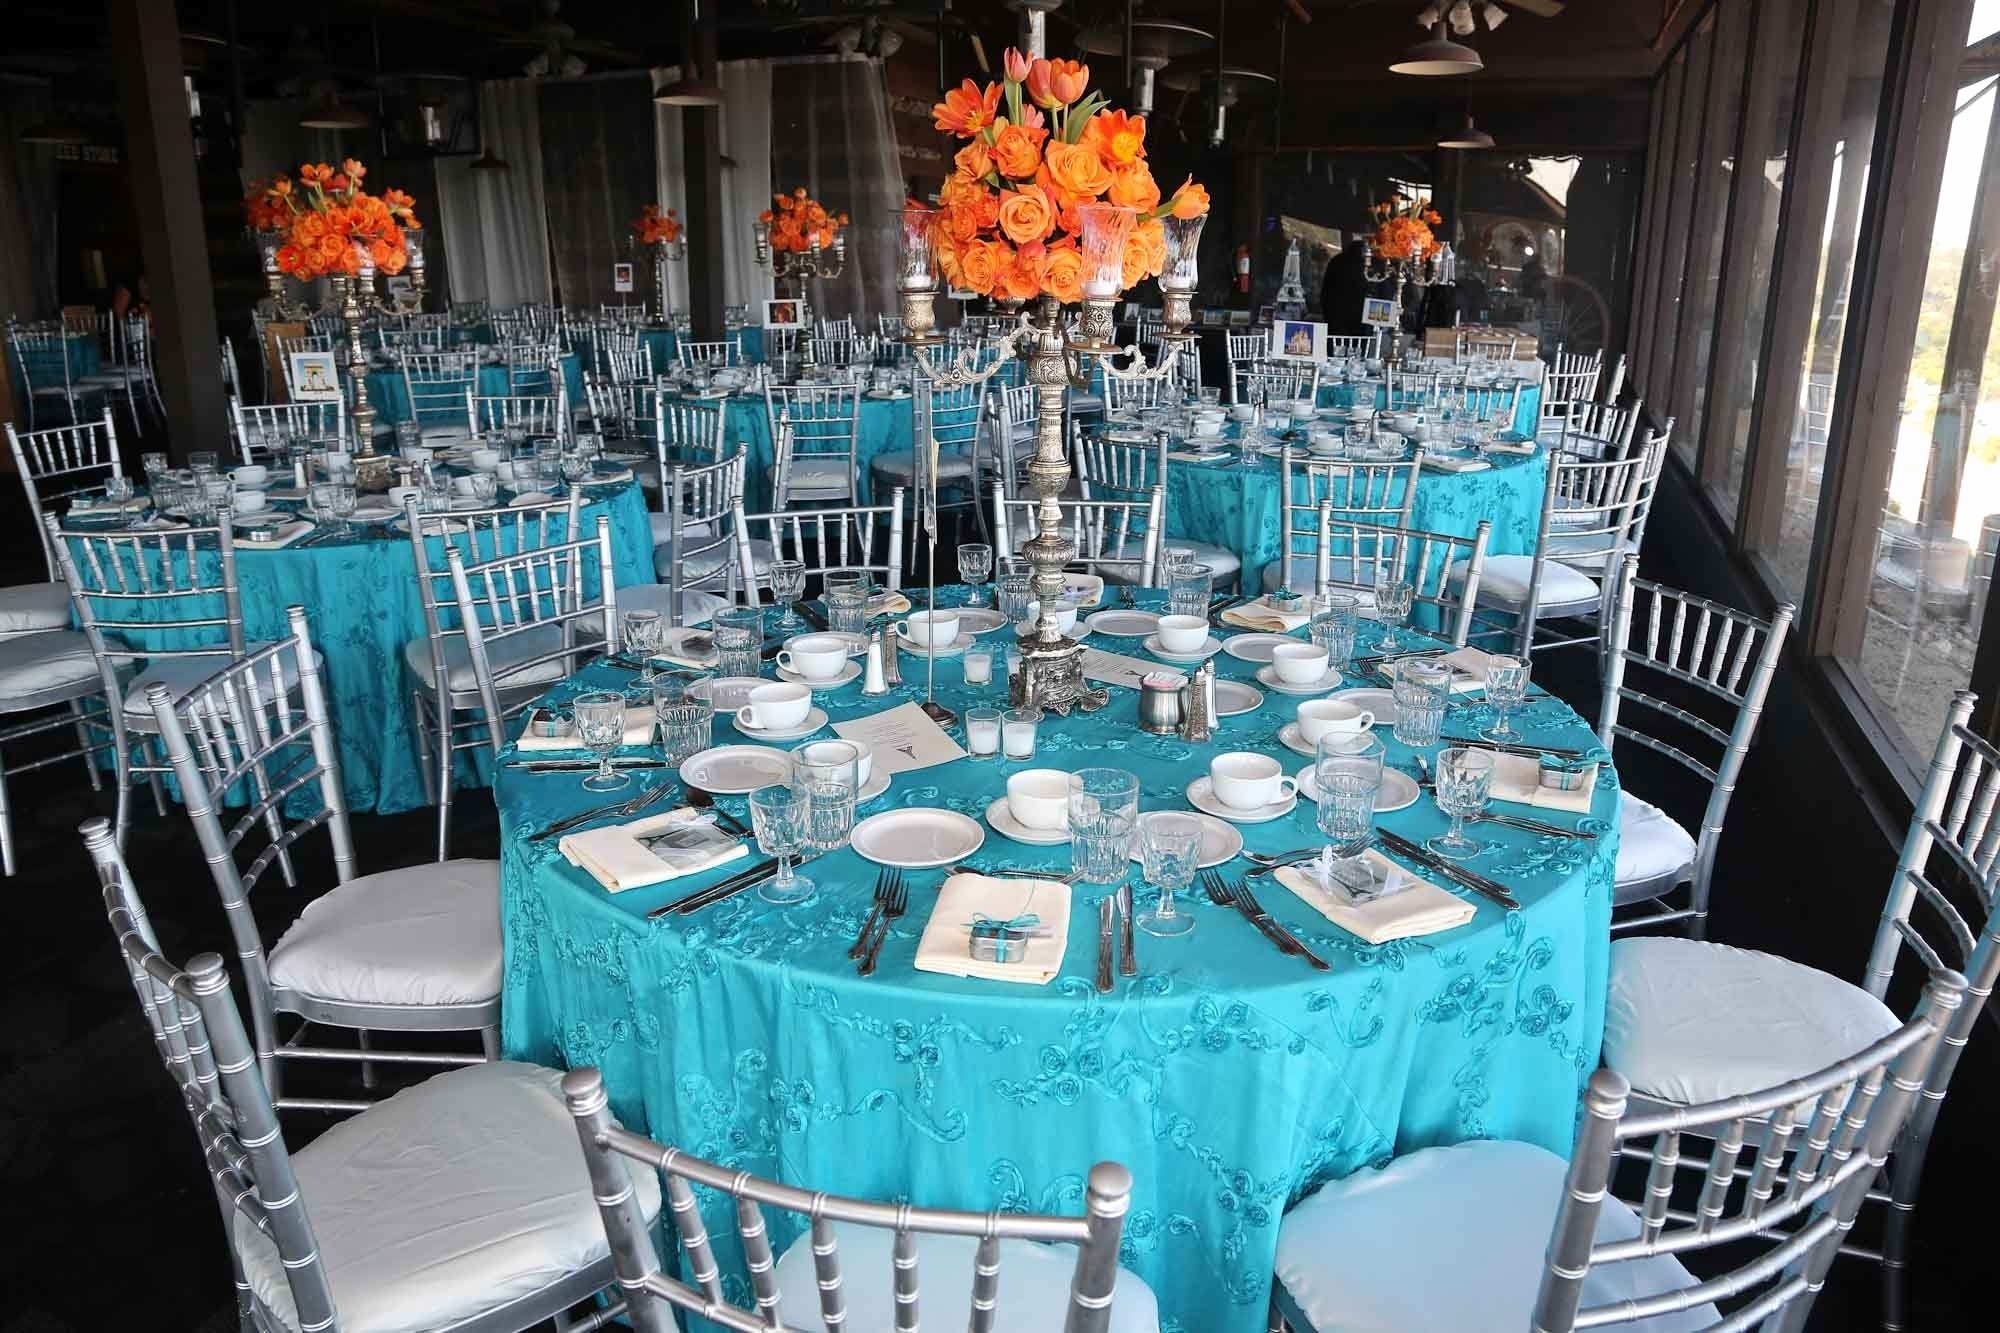 10 Lovely Decoration Ideas For Graduation Party school for decorating weddings new grad party decoration ideas 2022